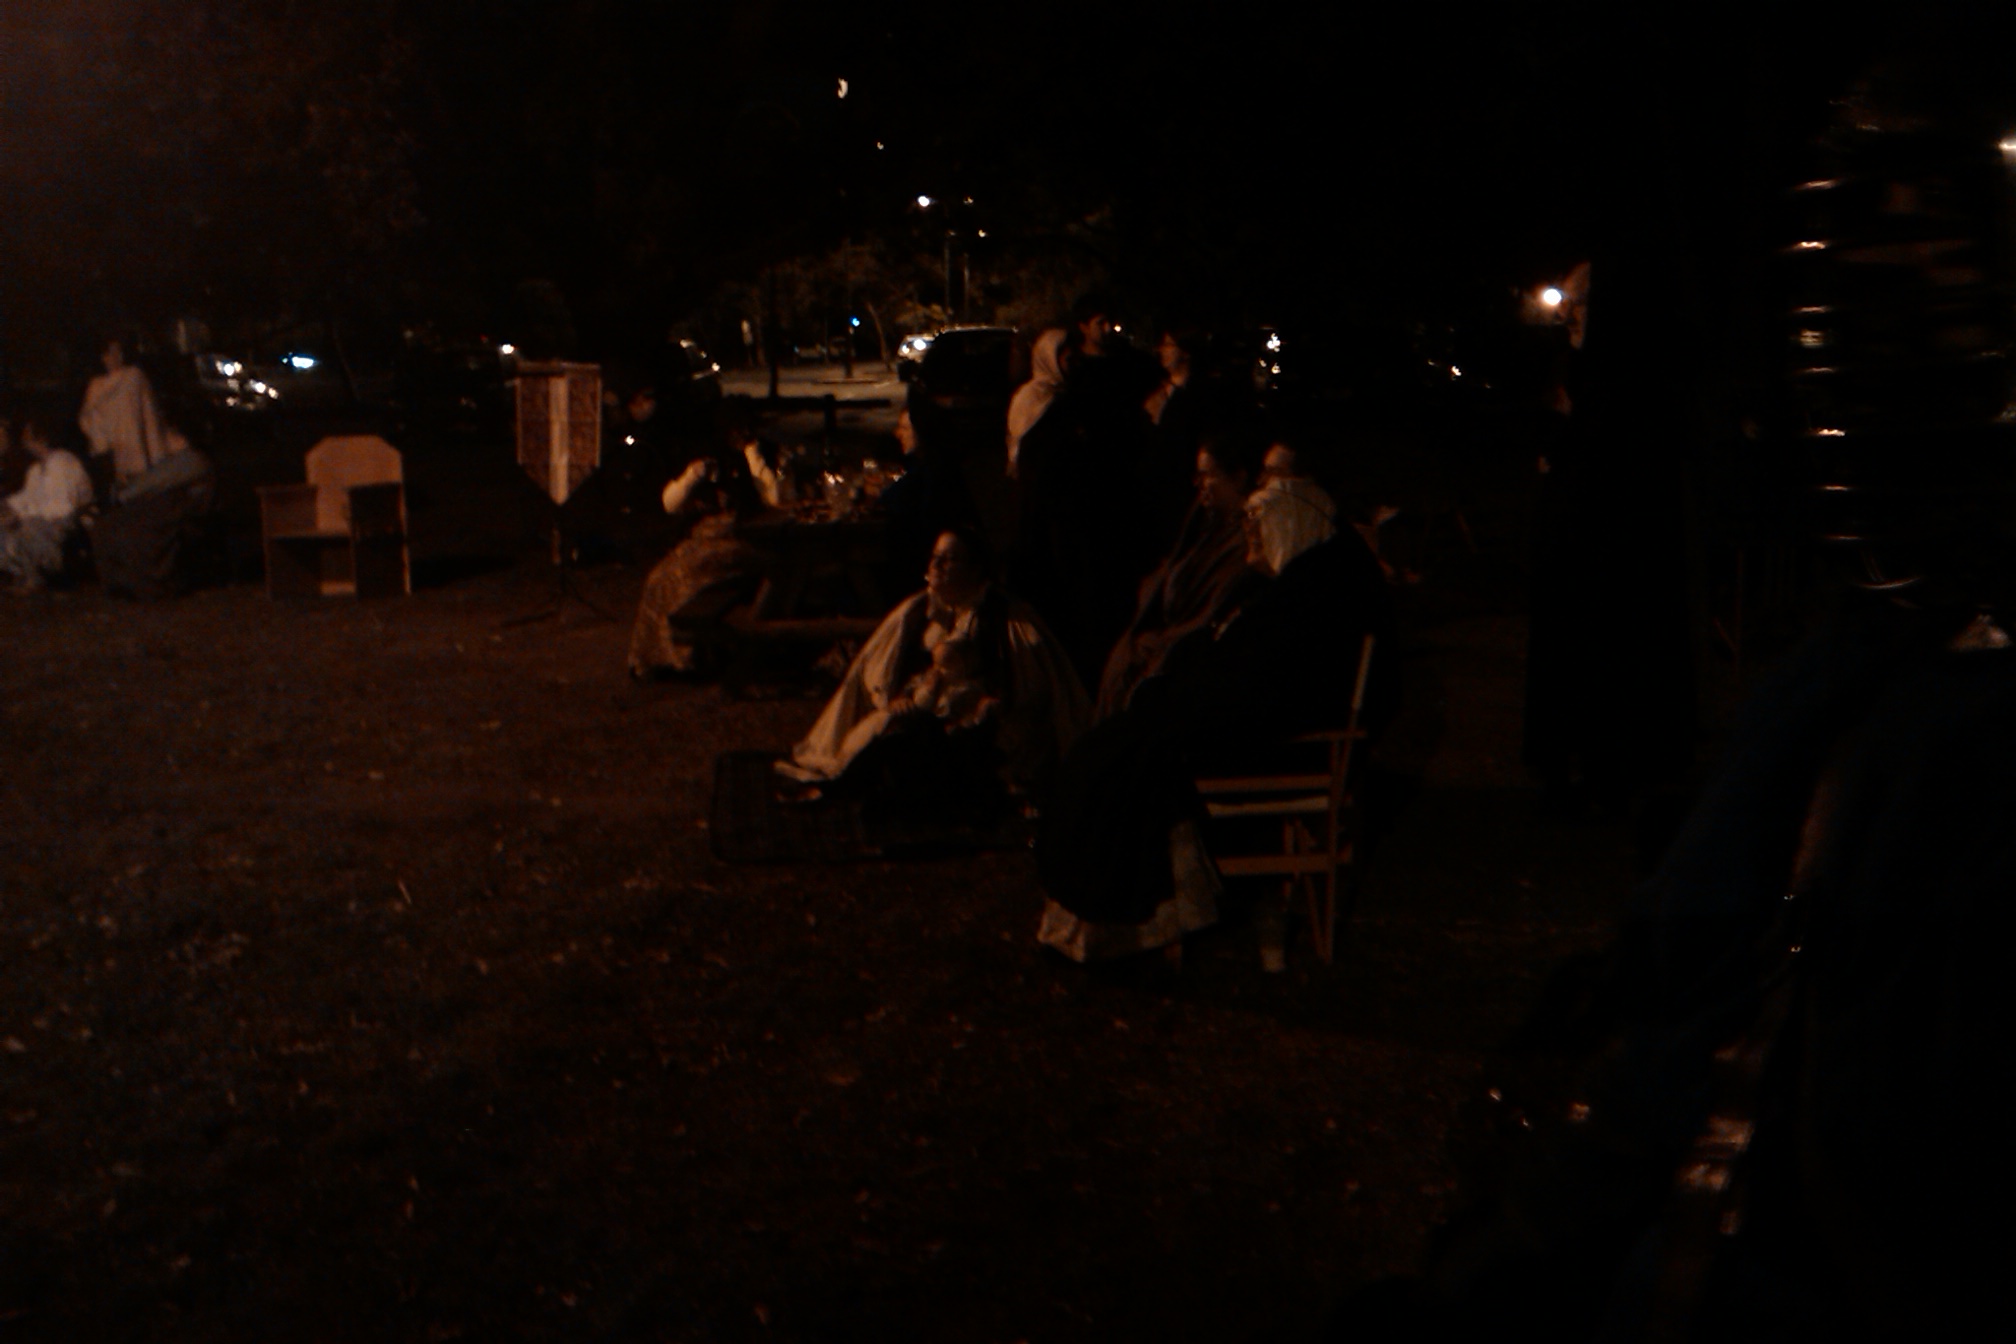 people sitting on lawn chairs at night in the dark